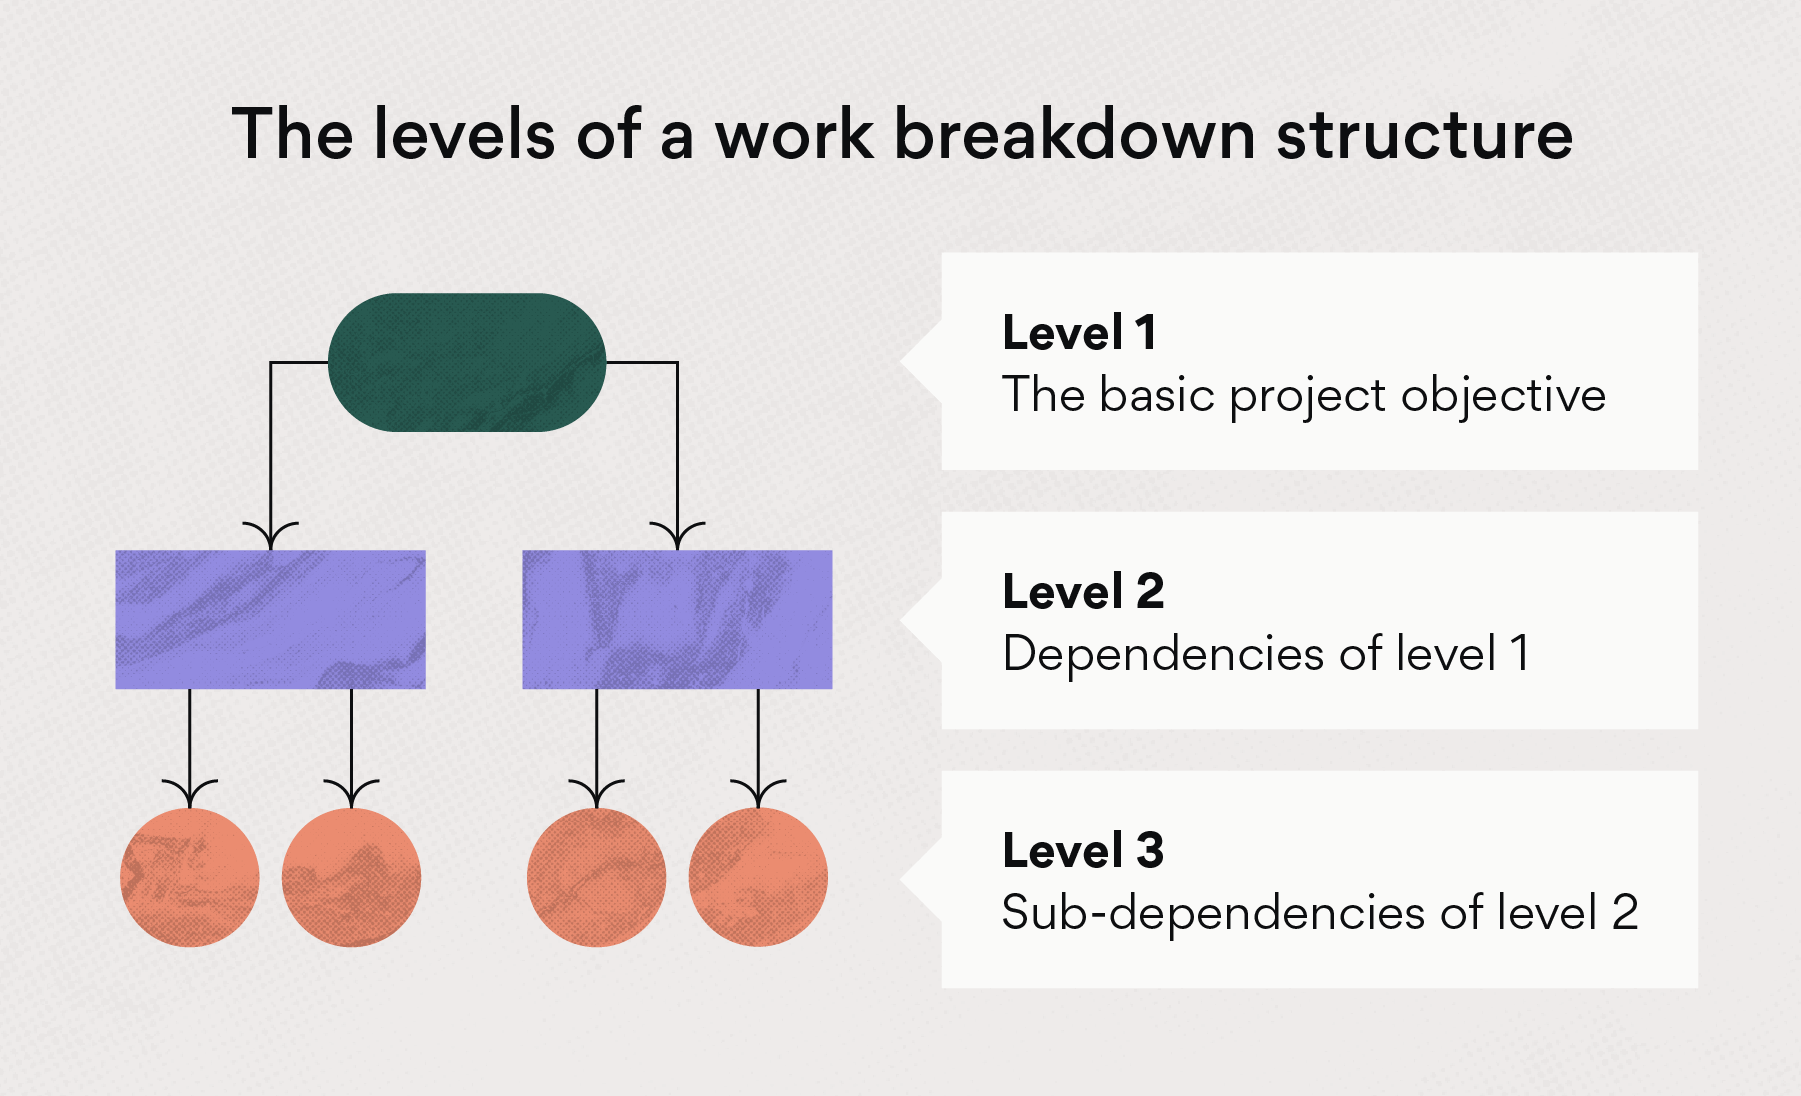 What are the 3 levels of work breakdown structure?